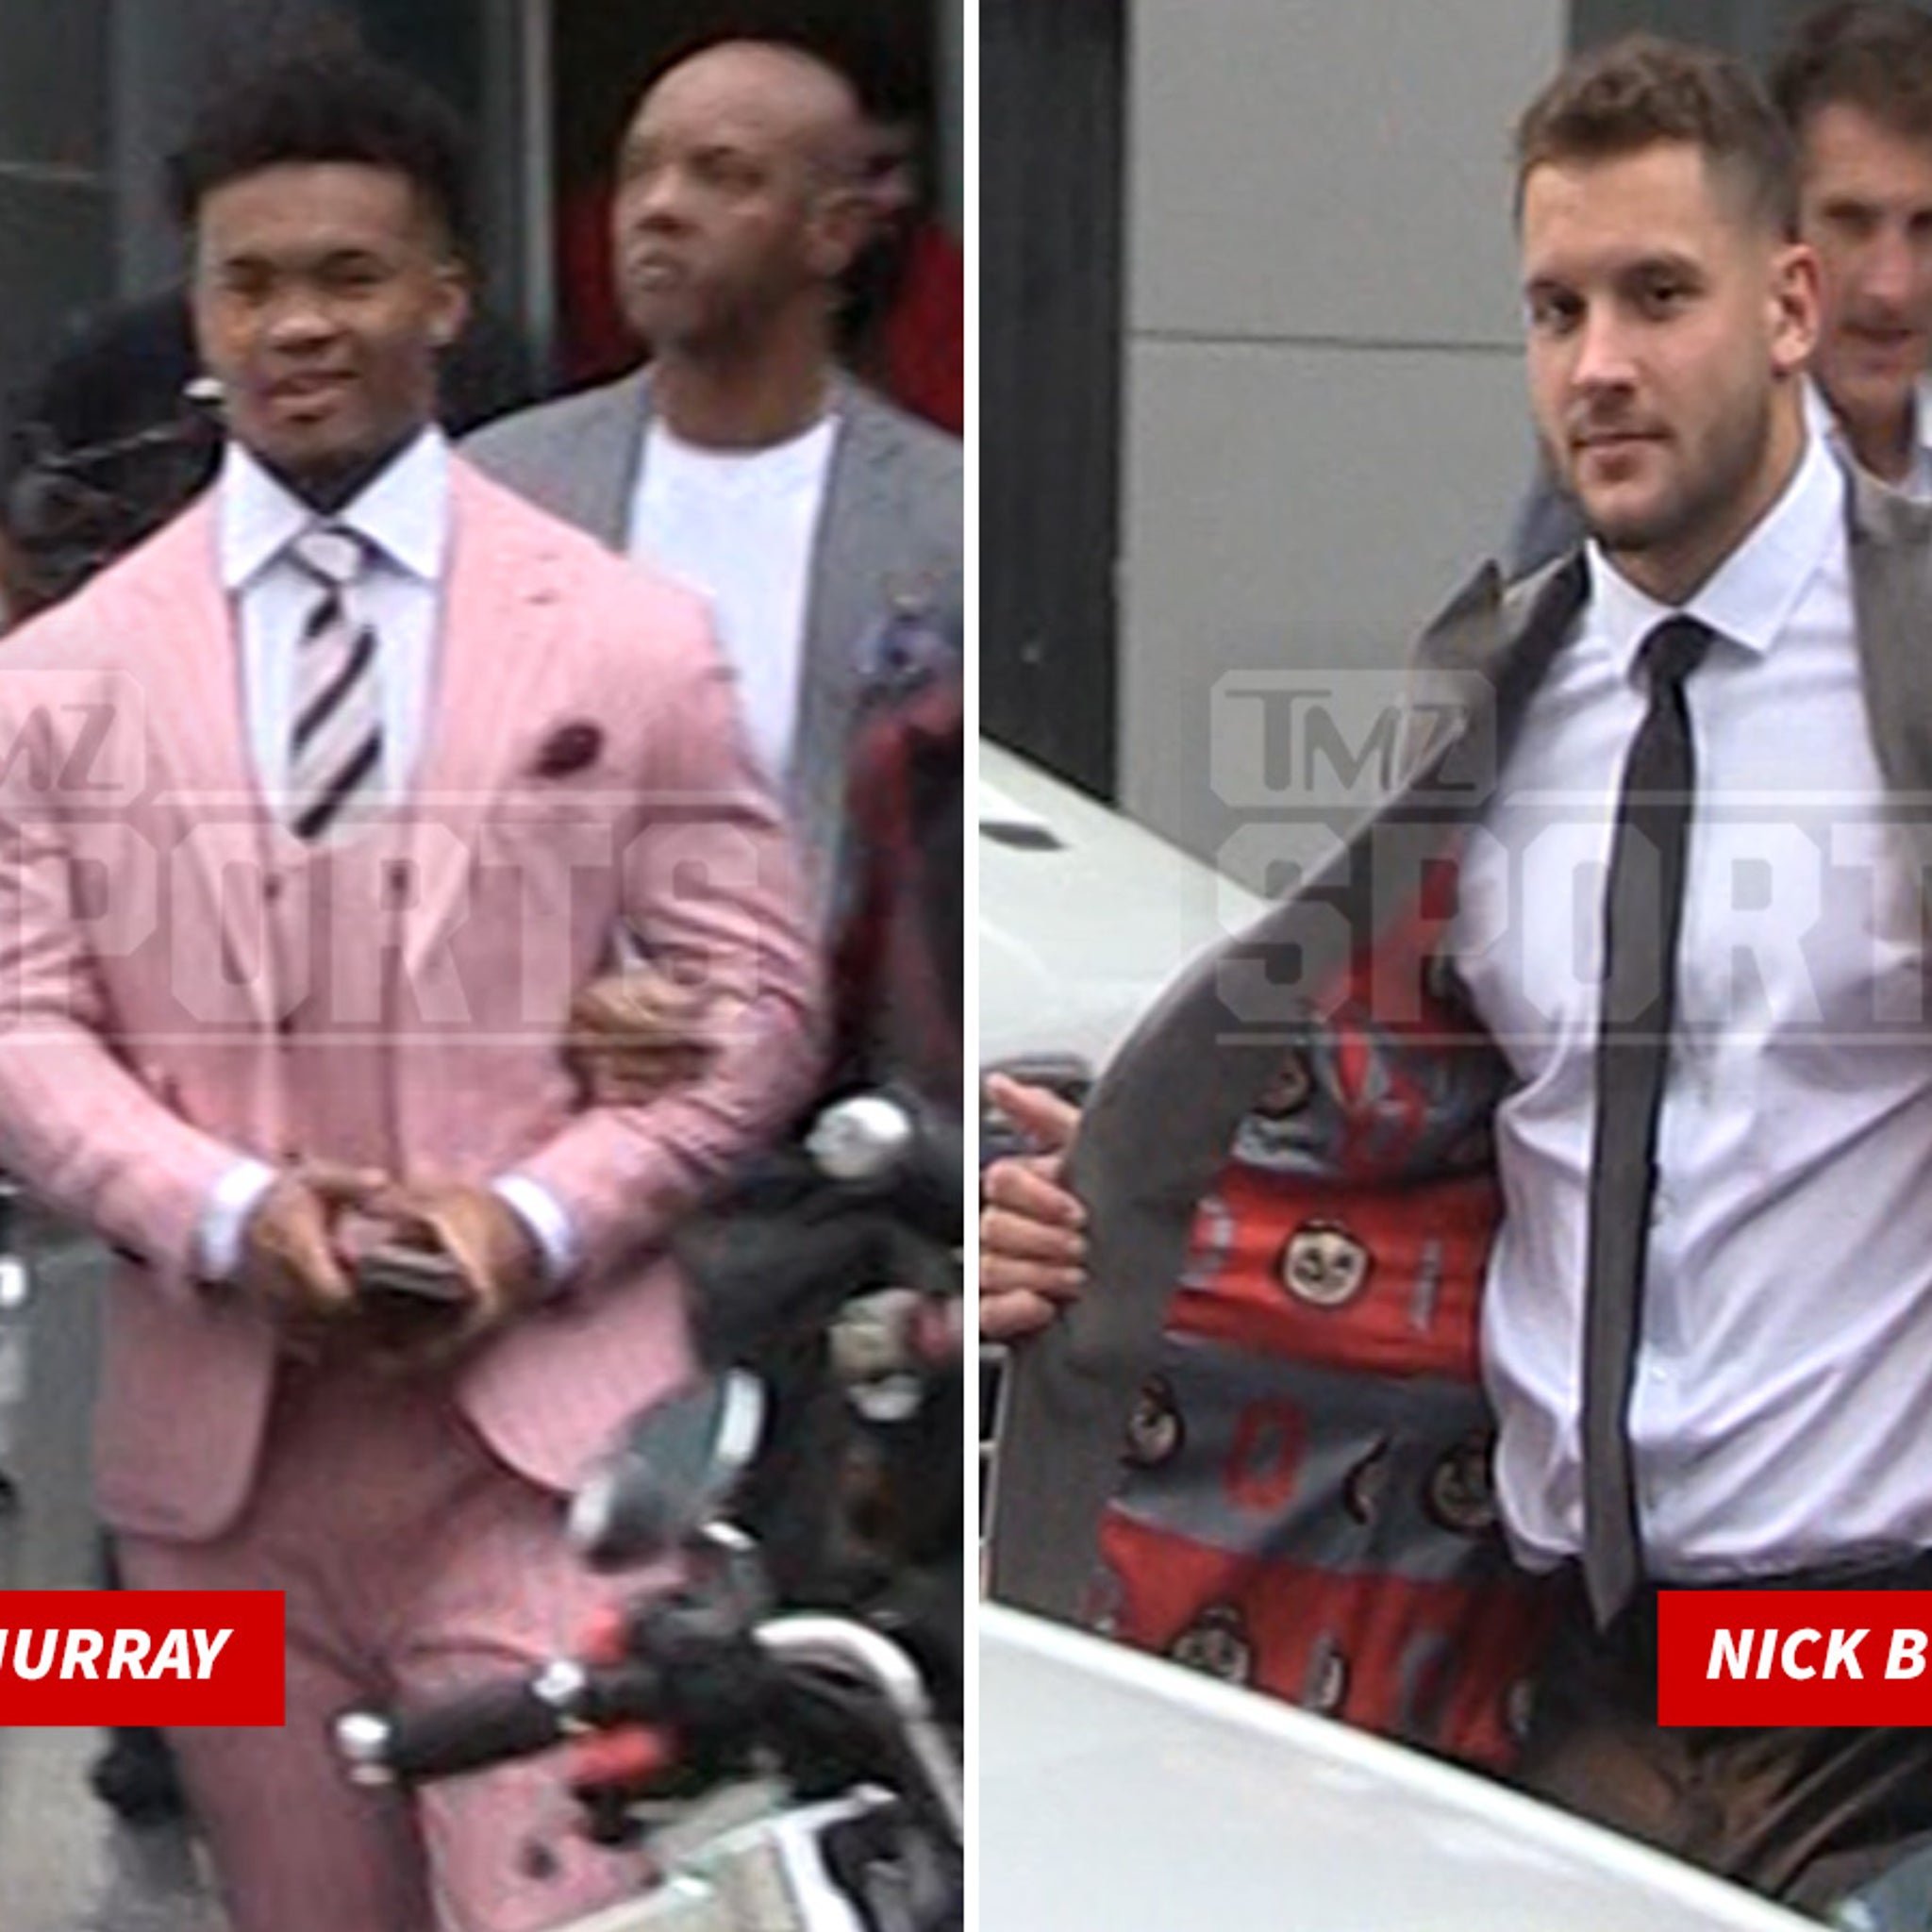 NFL Draft Prospects Swag Out, Kyler Murray Rocks Pink Suit!